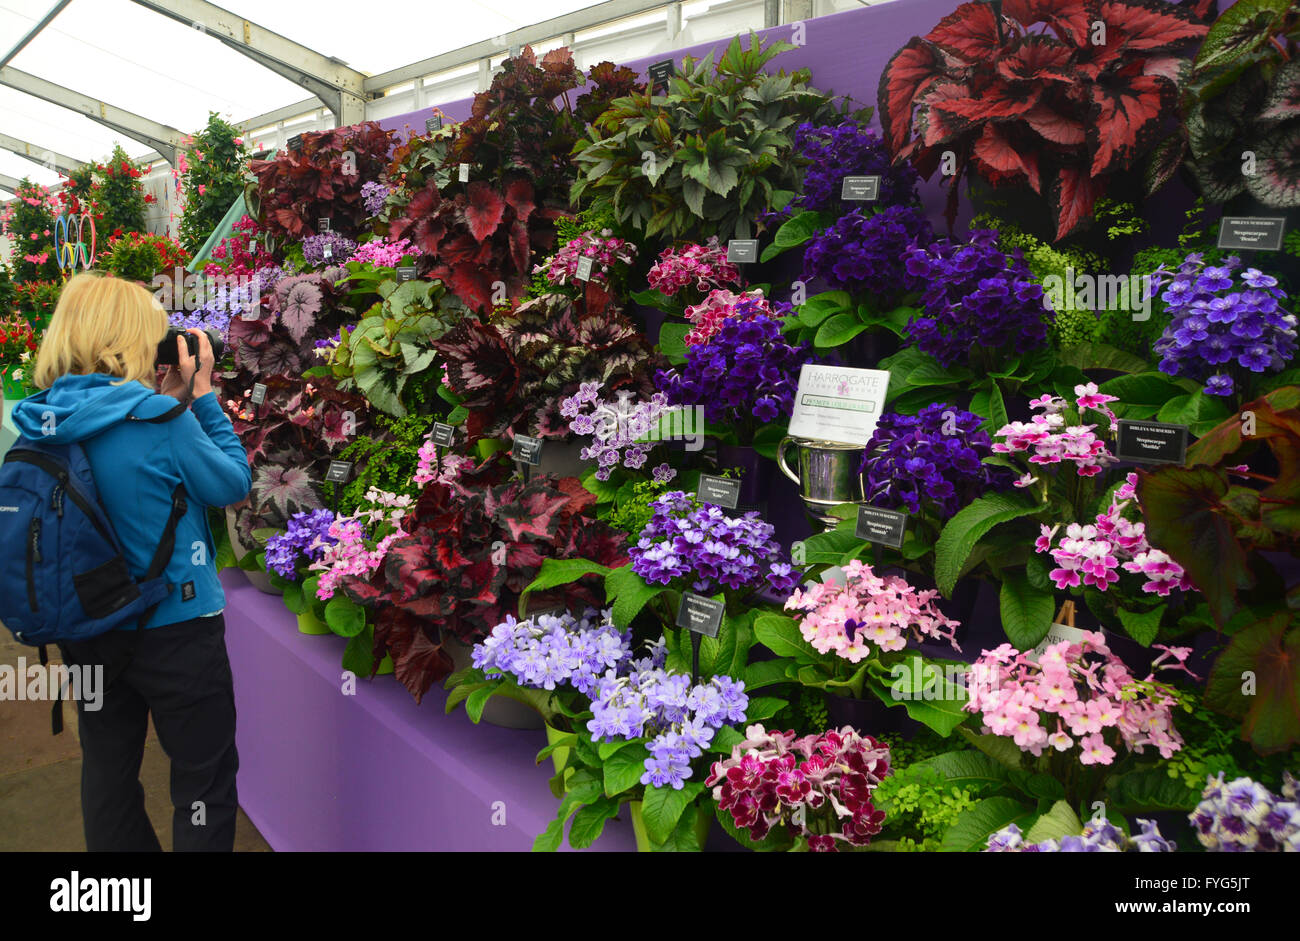 Lady Taking Photos of Houseplants on Display in the Plant Pavilion at the Harrogate Spring Flower Show. Yorkshire UK. Stock Photo